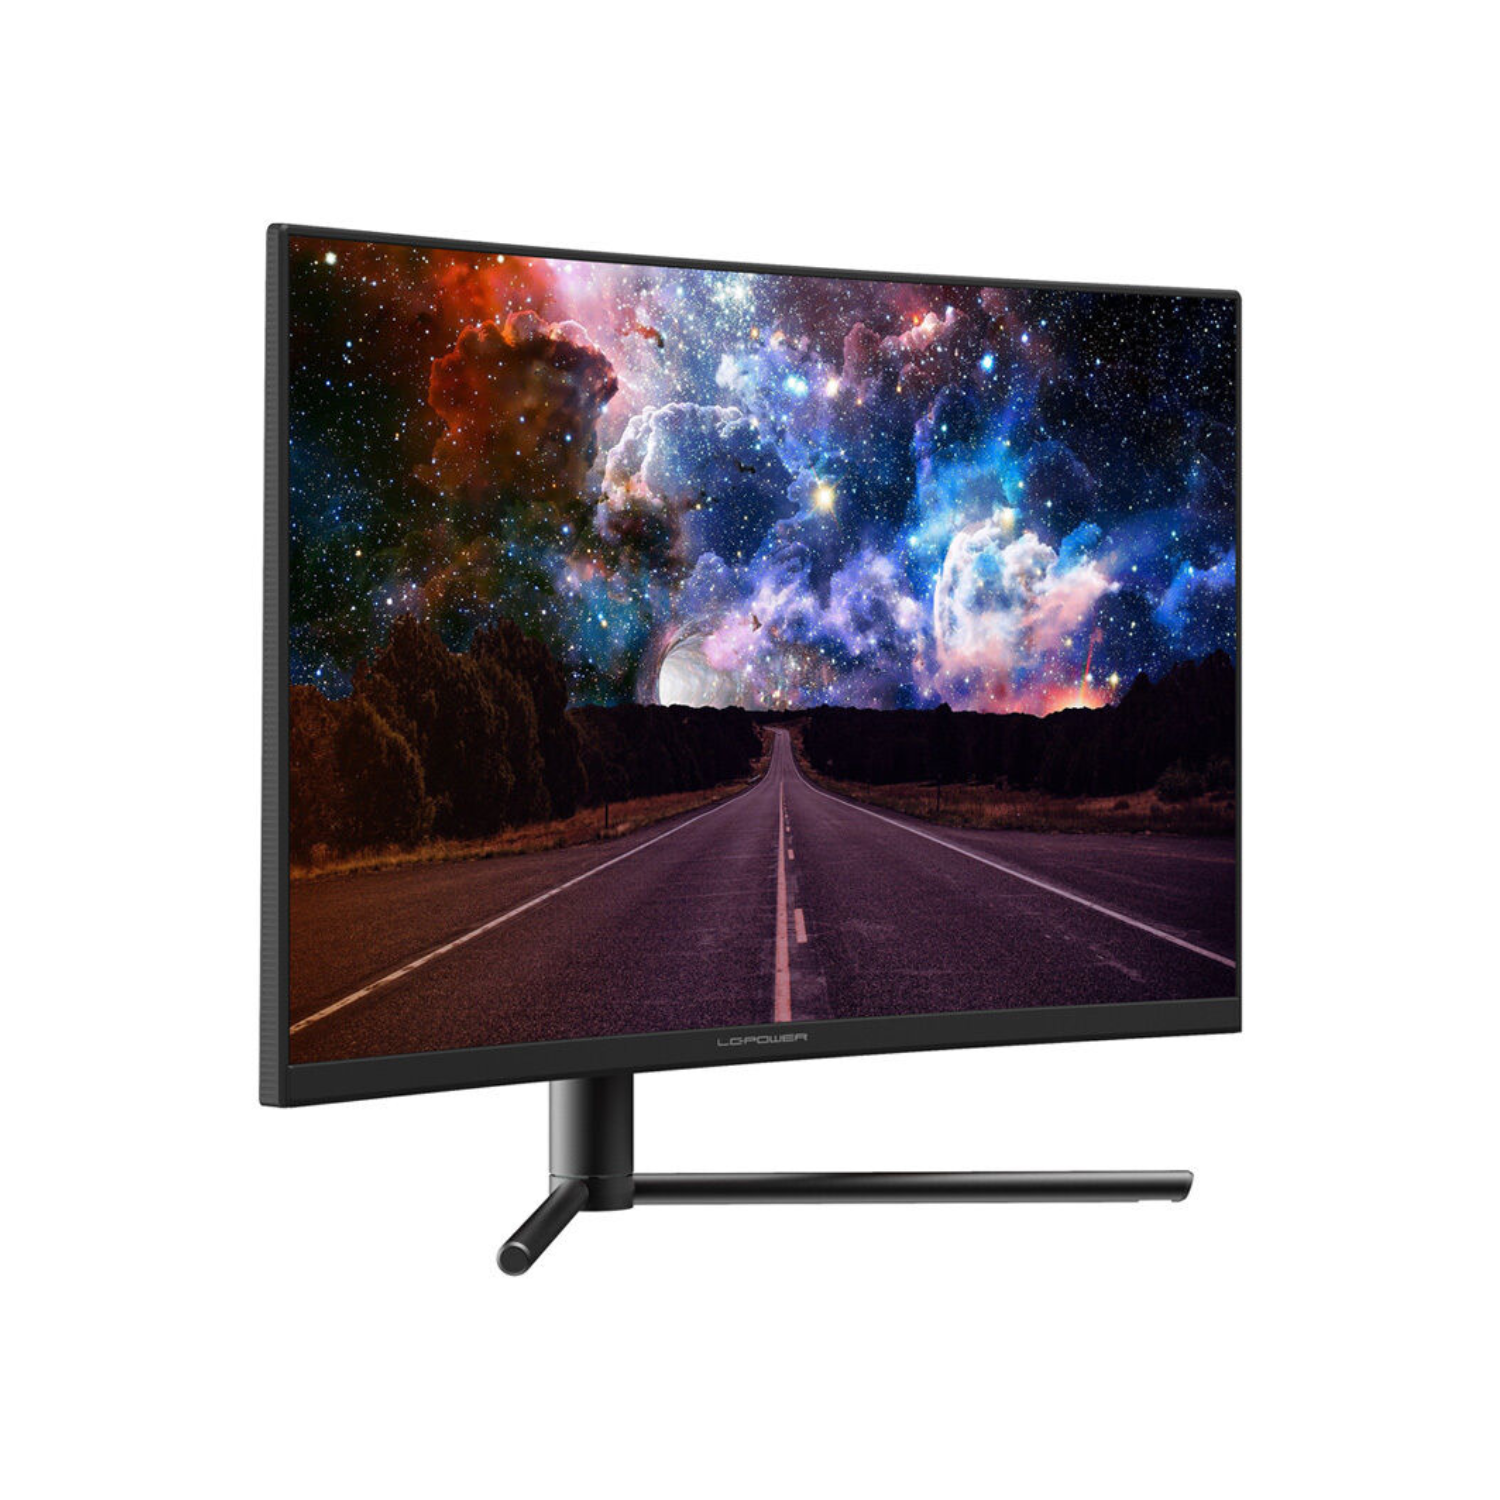 LC-M27-FHD-240-C POWER (1 nativ) Full-HD 27 Hz LC 240 Hz 240 Reaktionszeit ms Zoll Monitor, Gaming-Monitor , ,